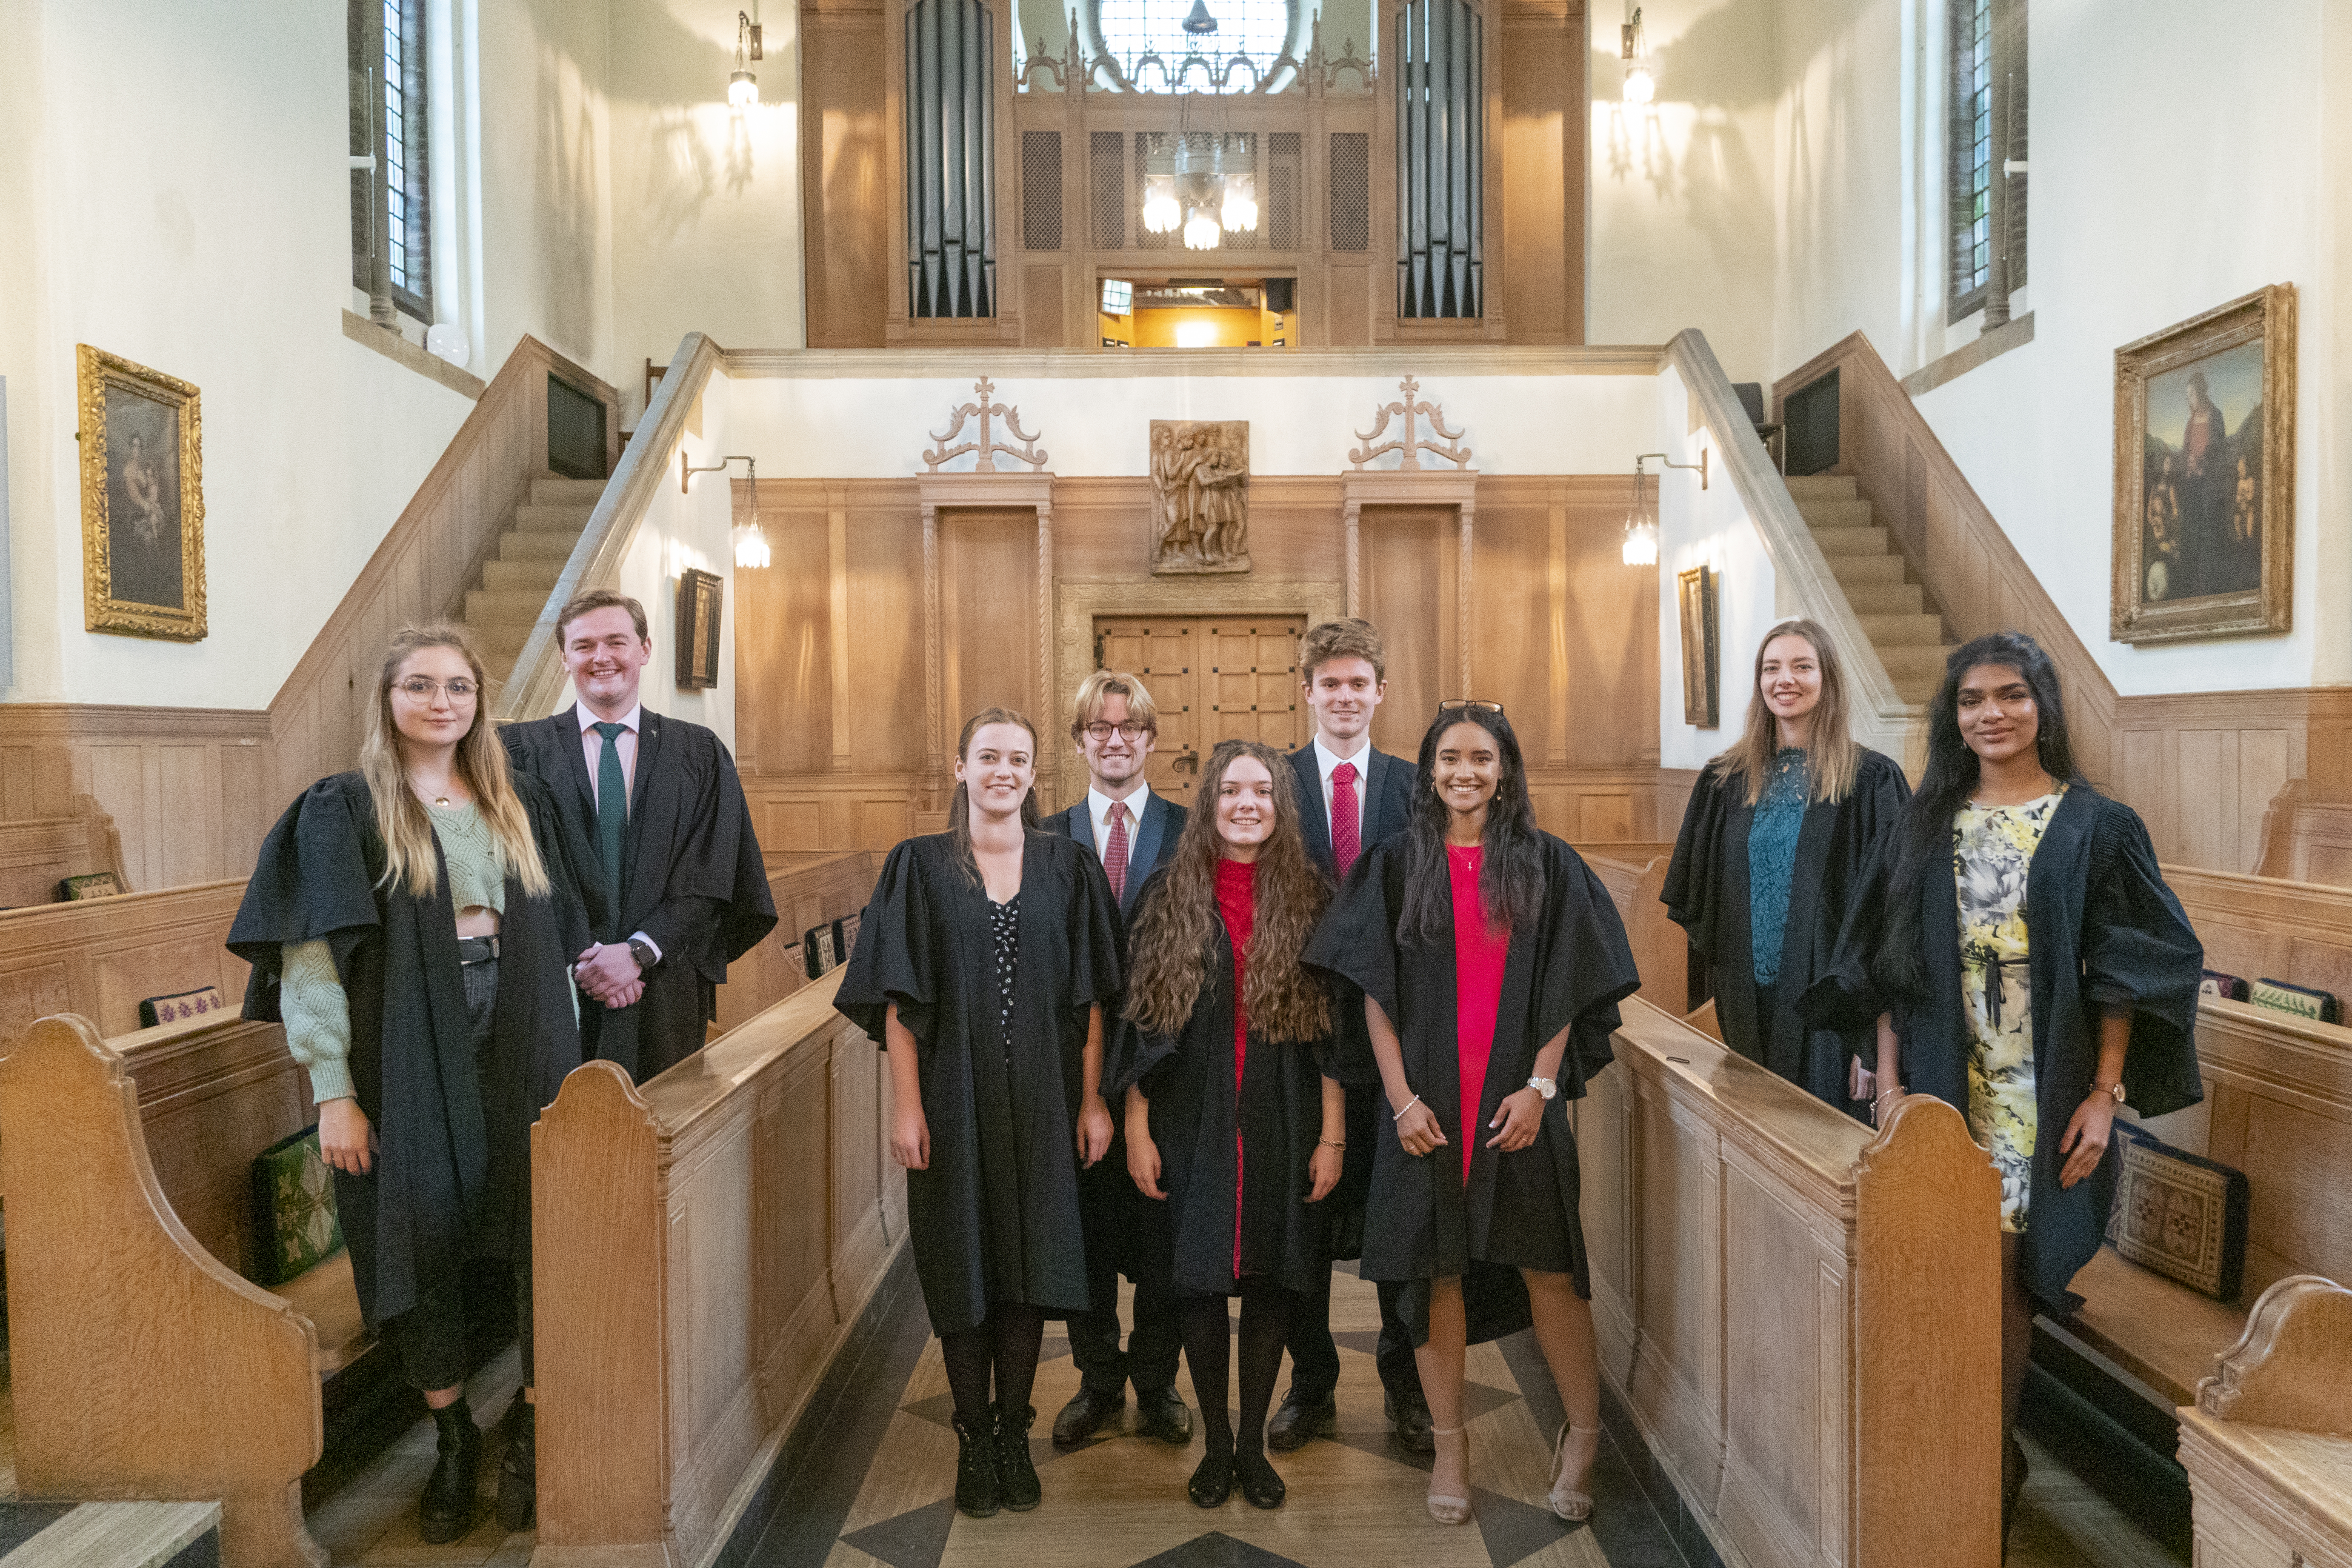 LMH Choral Scholars in the LMH Chapel